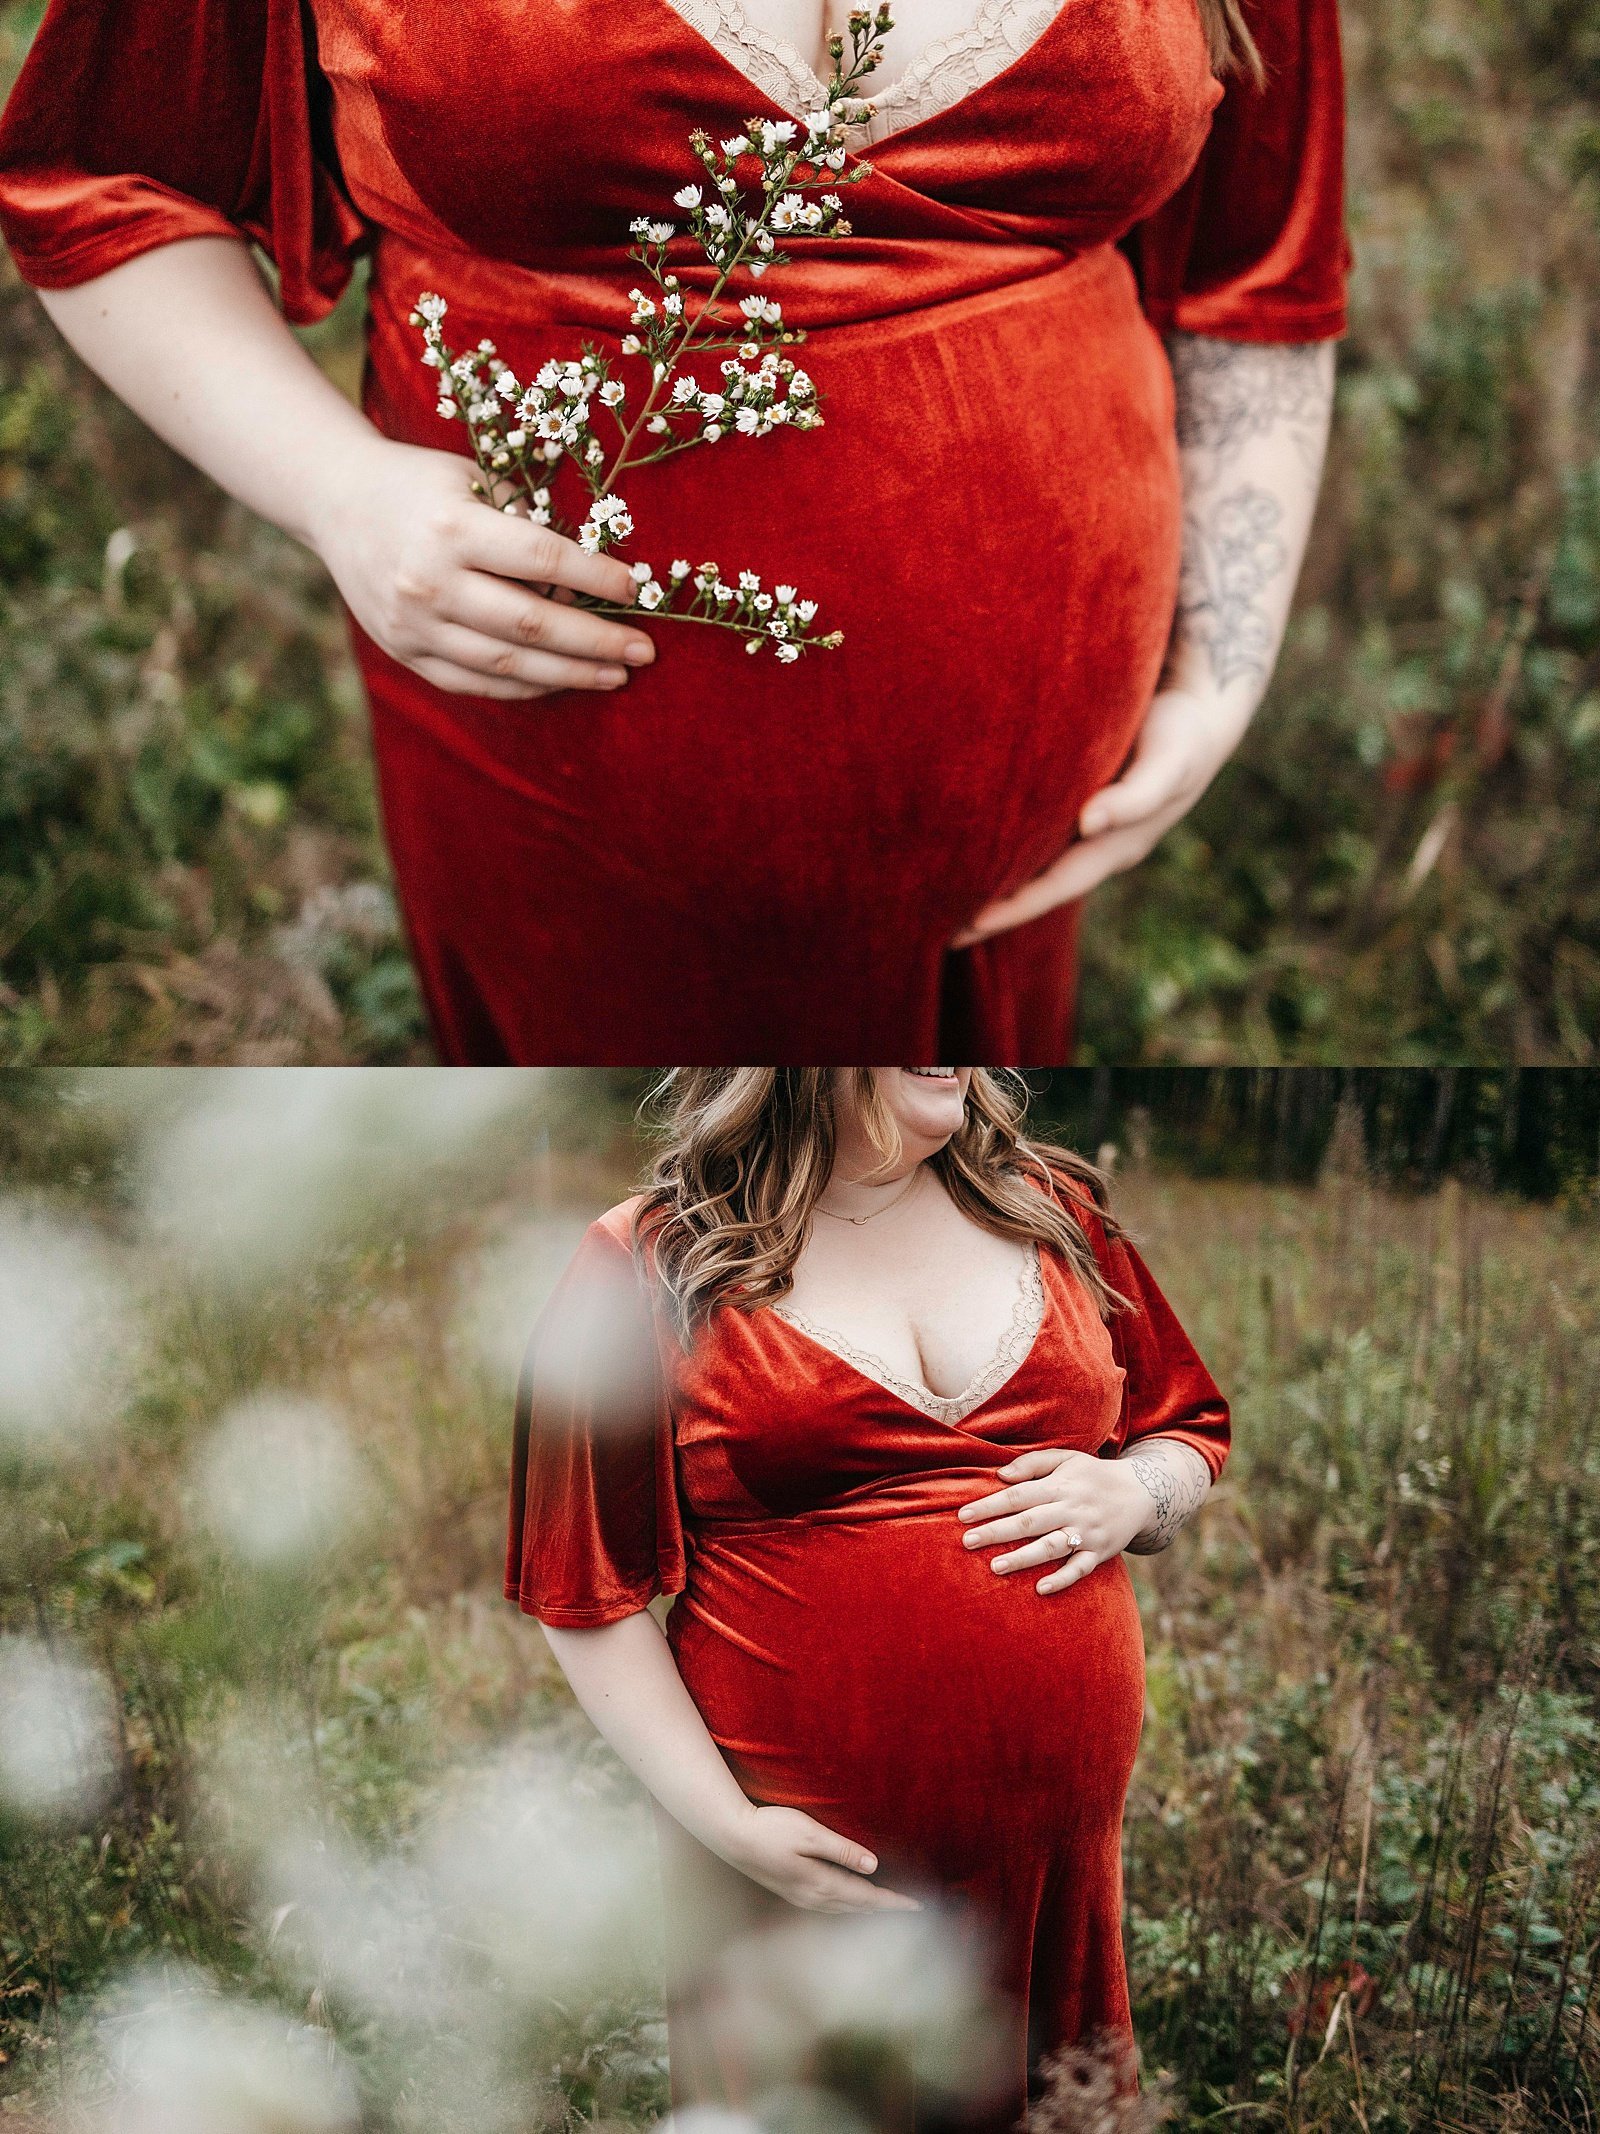  Pregnant woman in a red velvet dress holding her belly with white flowers in her hand. 